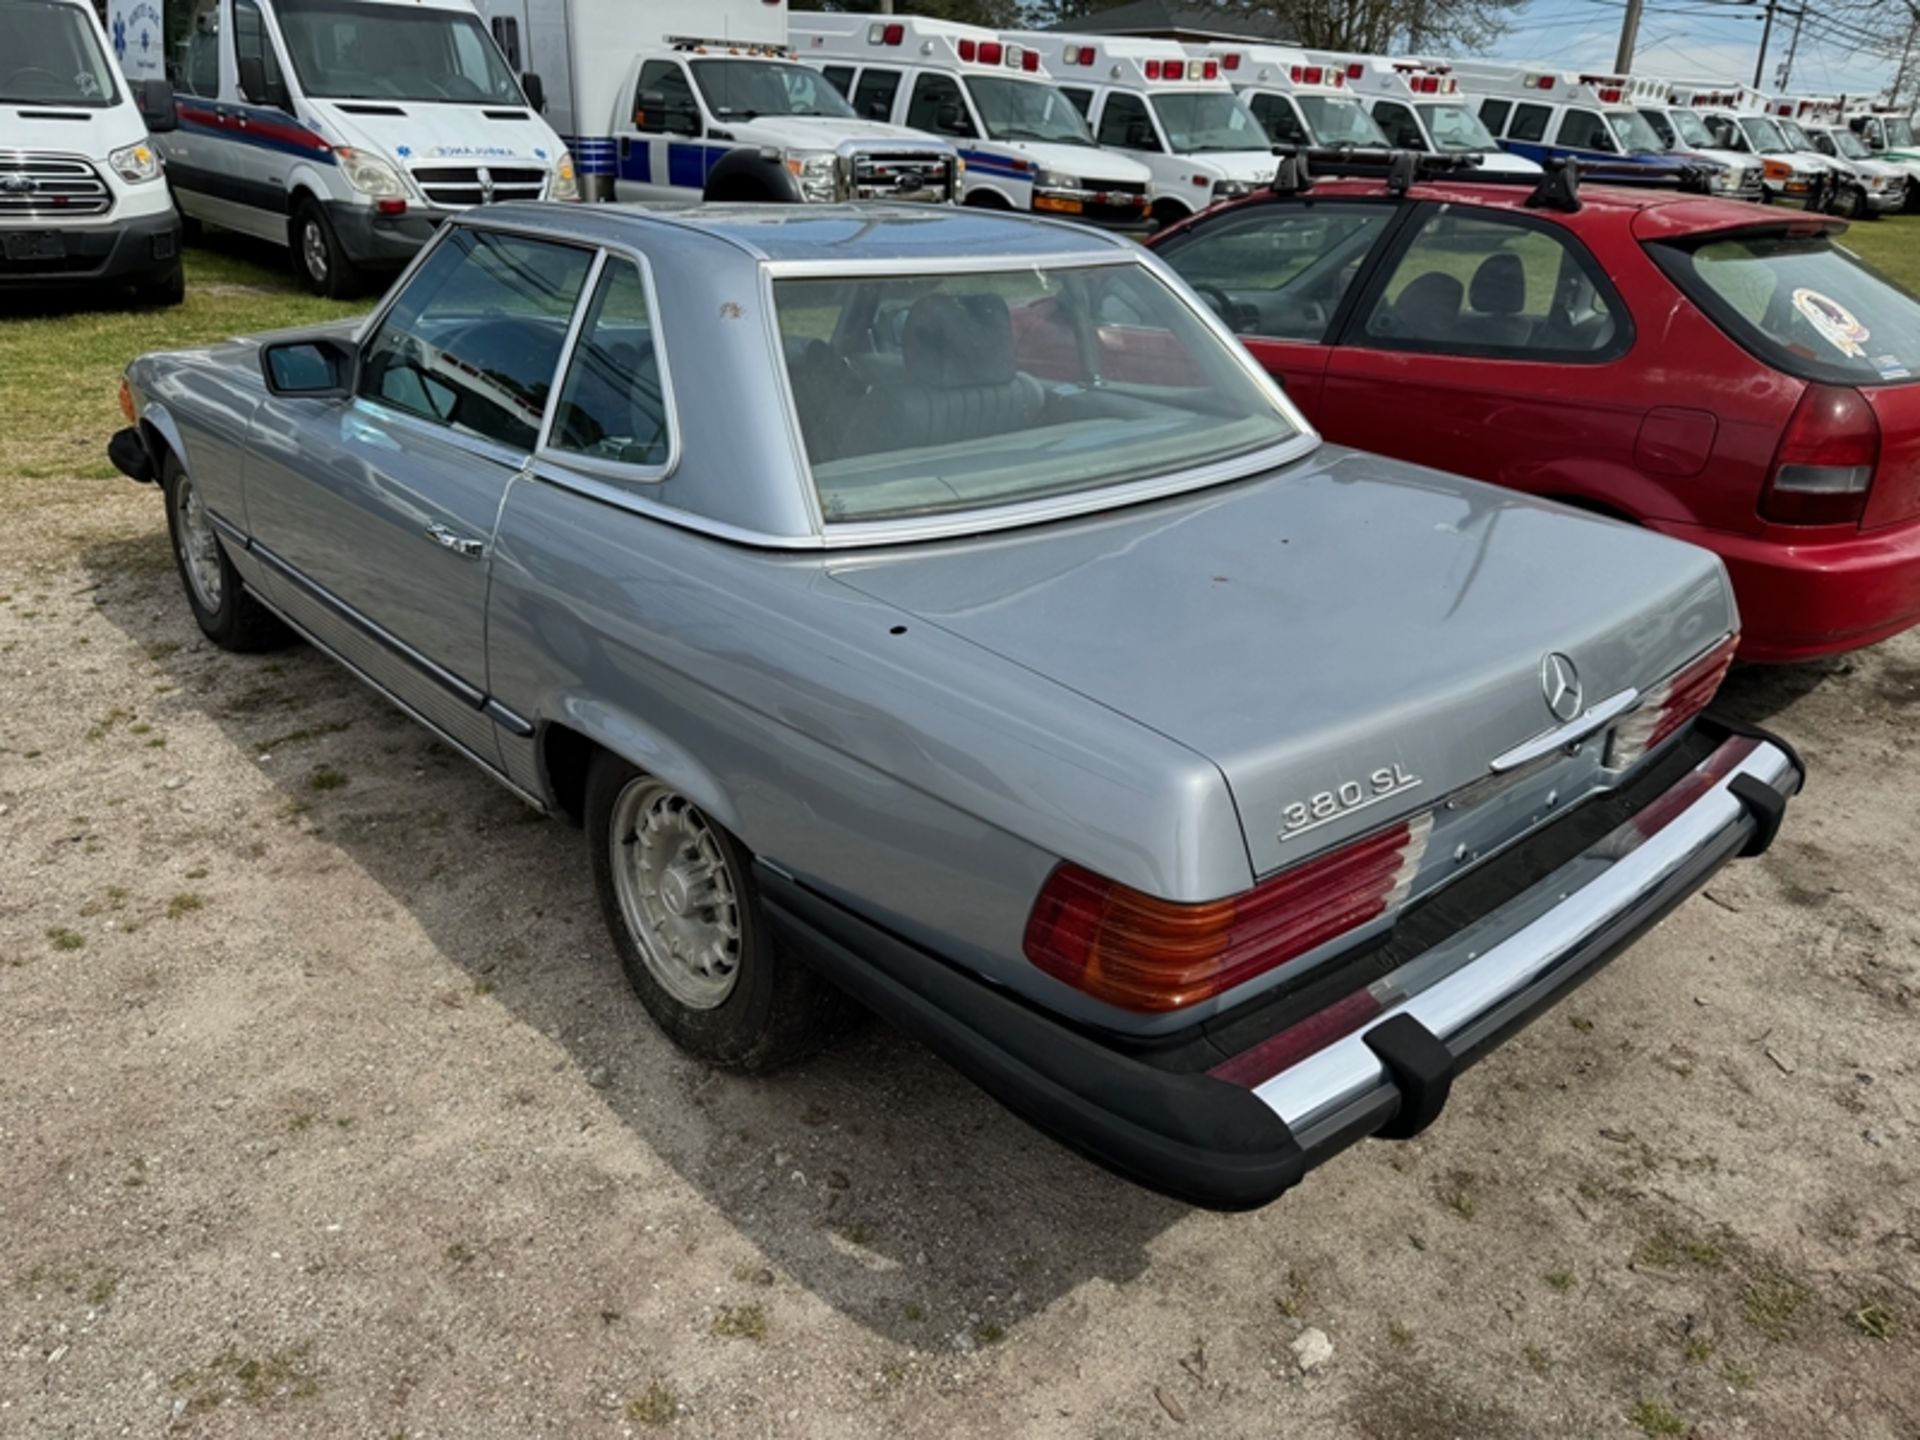 1984 MERCEDES 380SL - 116,262 miles showing - WDBBA45A7EA009891 - Image 4 of 6